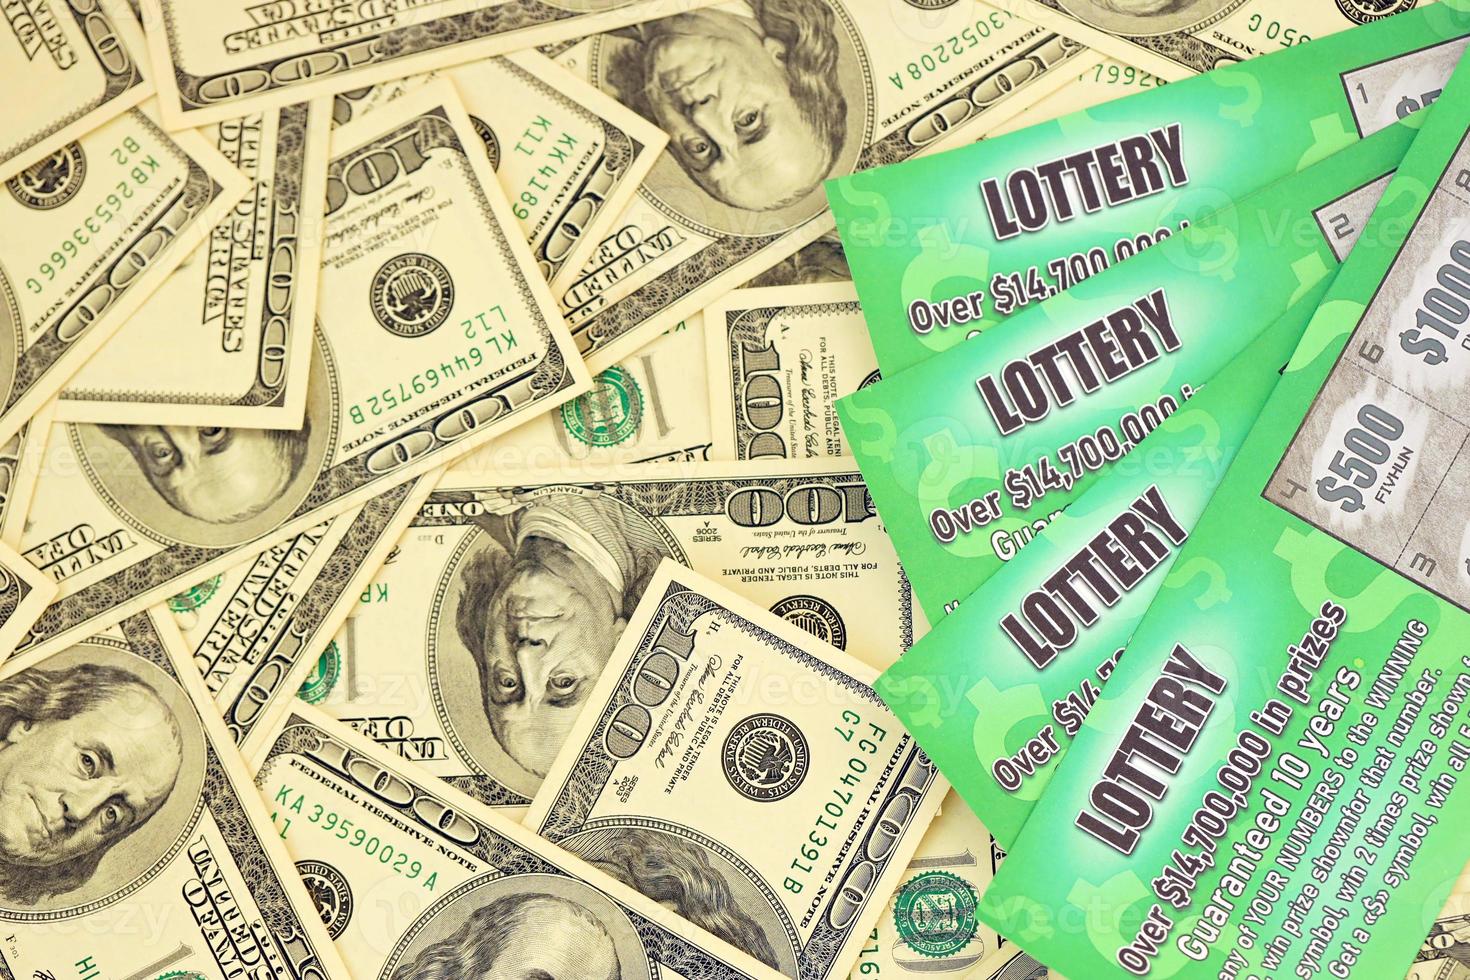 Close up view of green lottery scratch cards and us dollar bills. Many used fake instant lottery tickets with gambling results. Gambling addiction photo